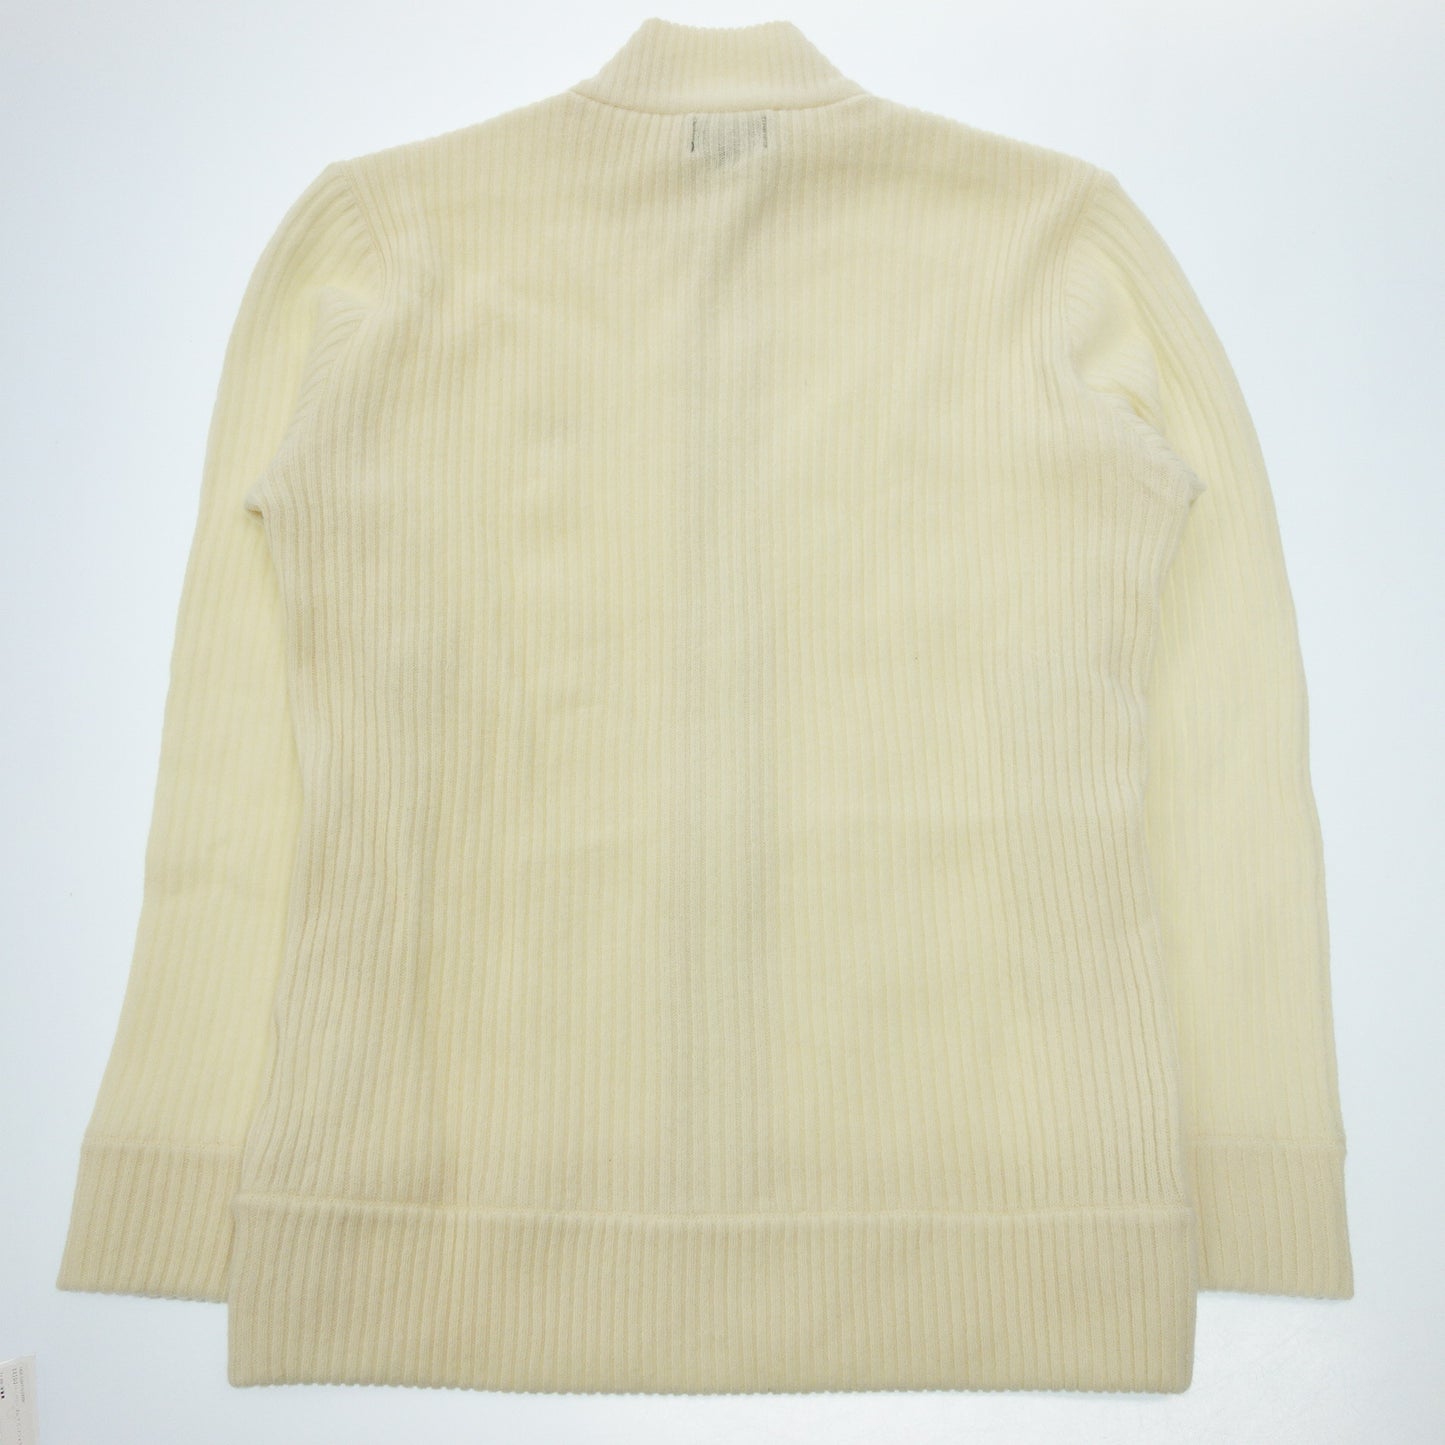 Good condition ◆ Burberry Golf Knit Jacket Down Switch L Women's White BURBERRY GOLF [AFB43] 